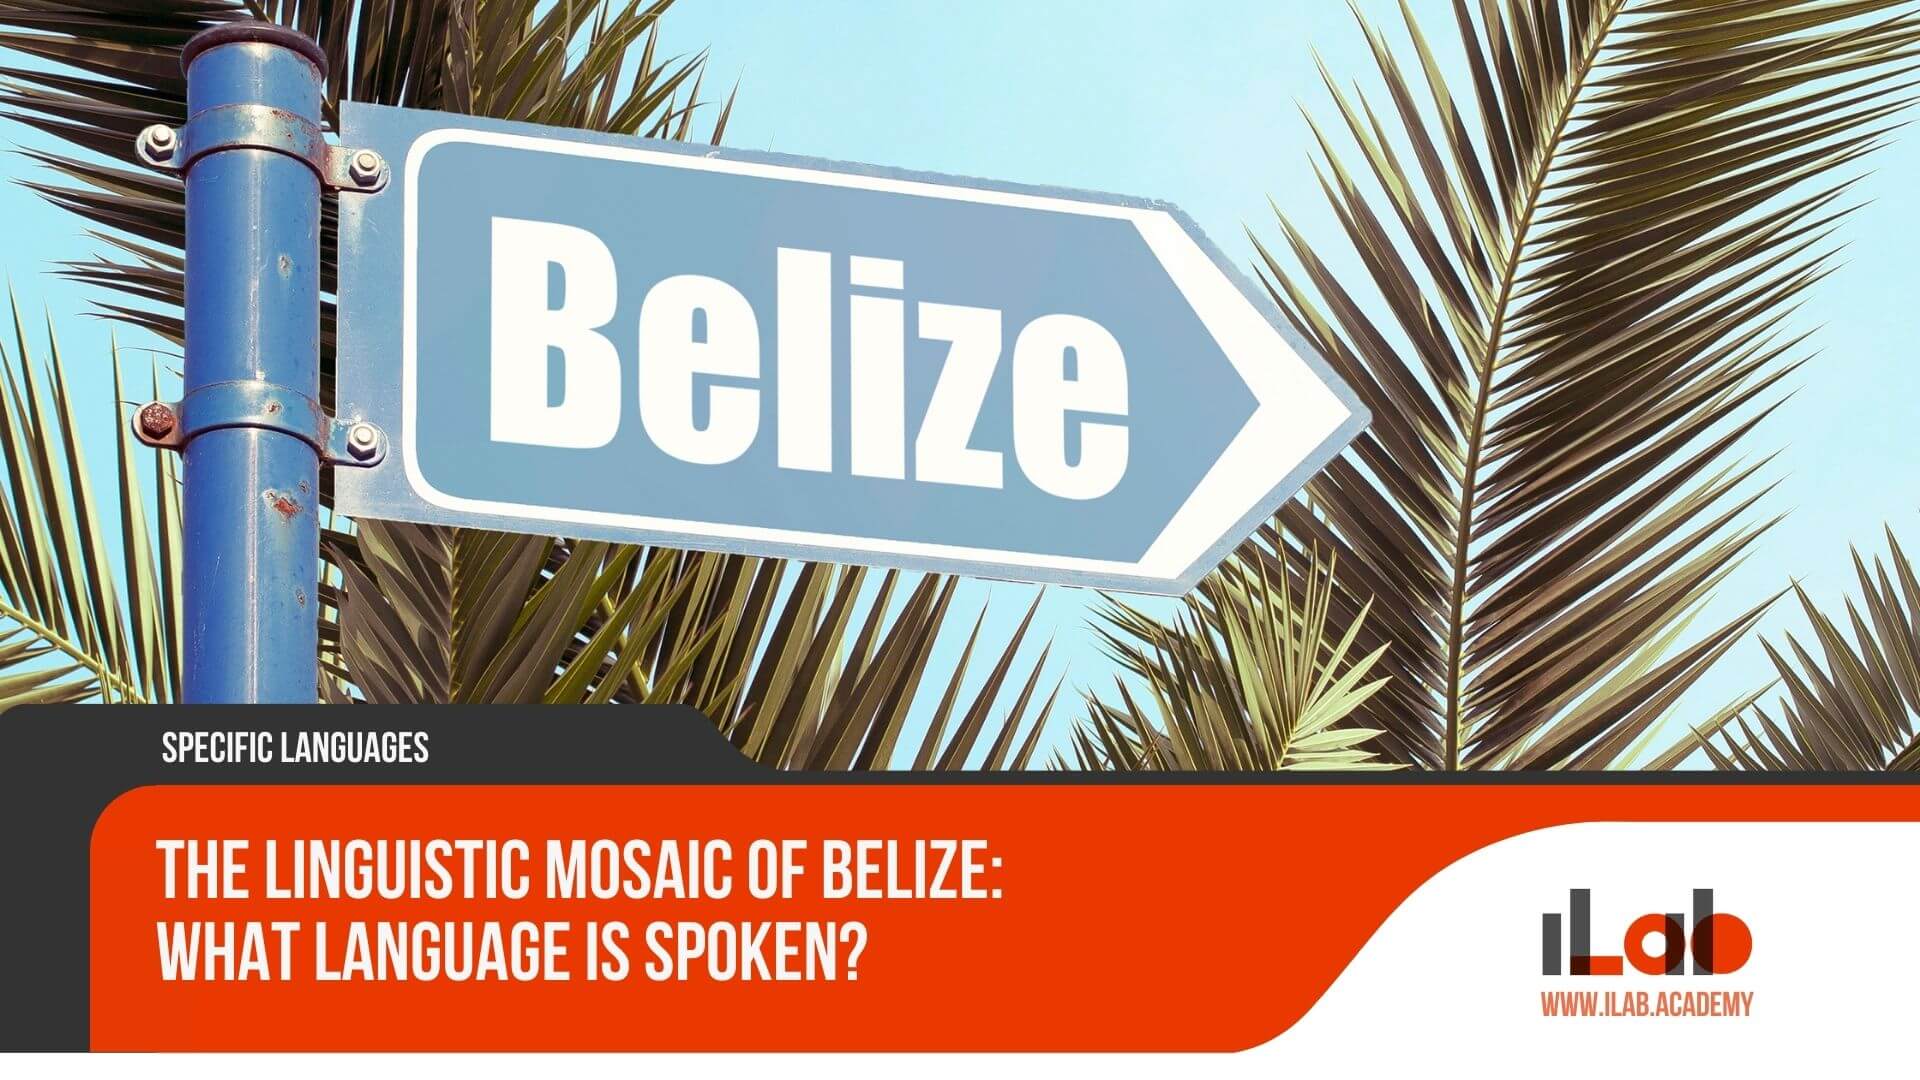 The Linguistic Mosaic of Belize: What Language Is Spoken?